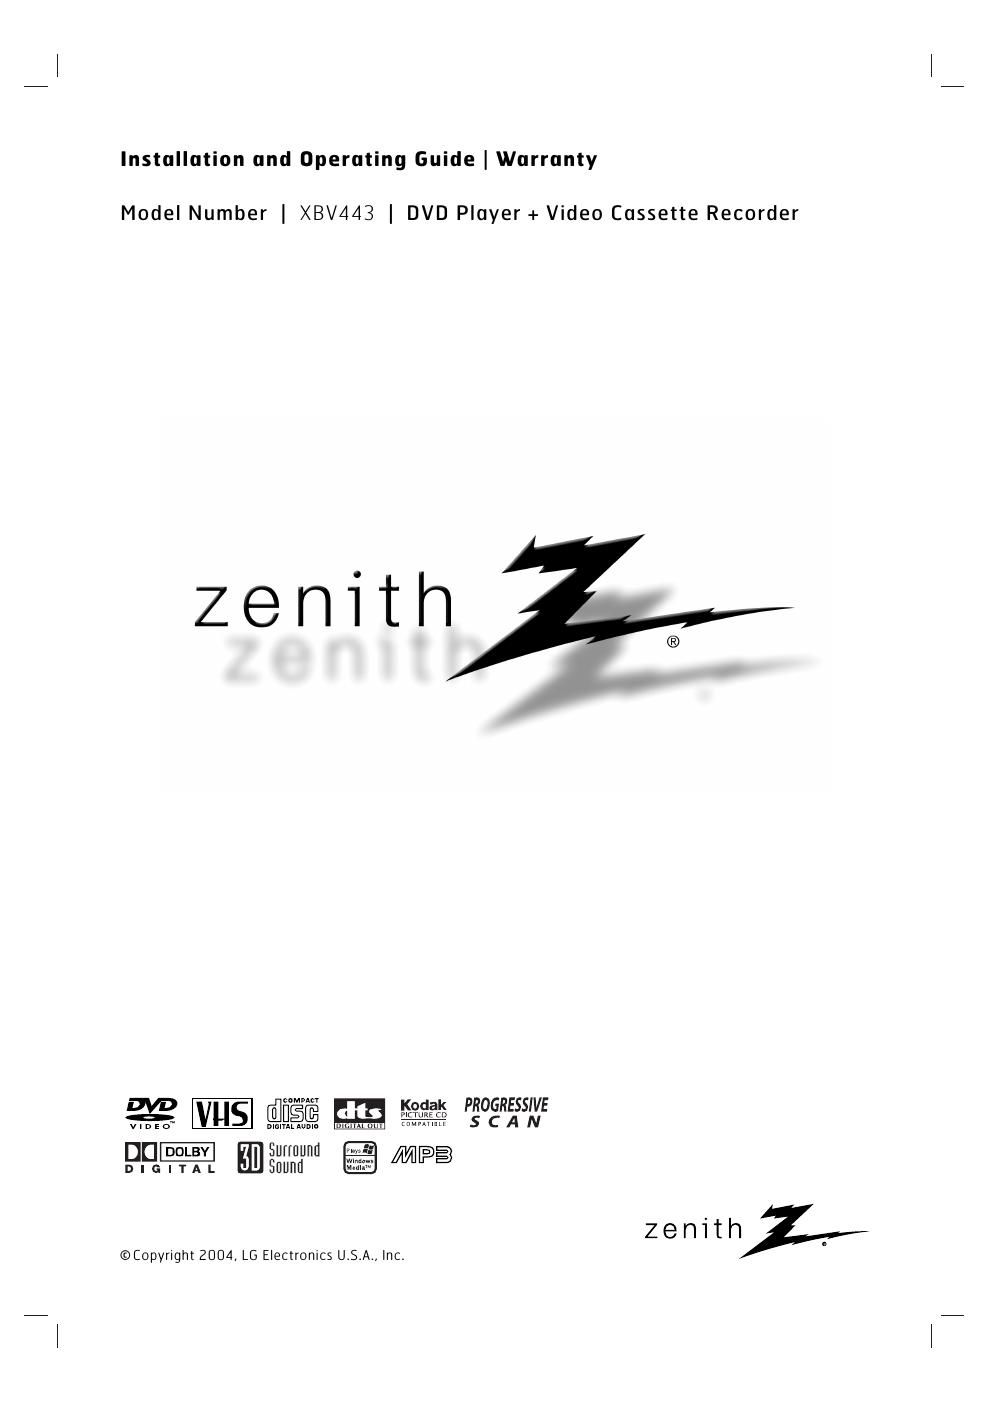 zenith xbv 443 owners manual